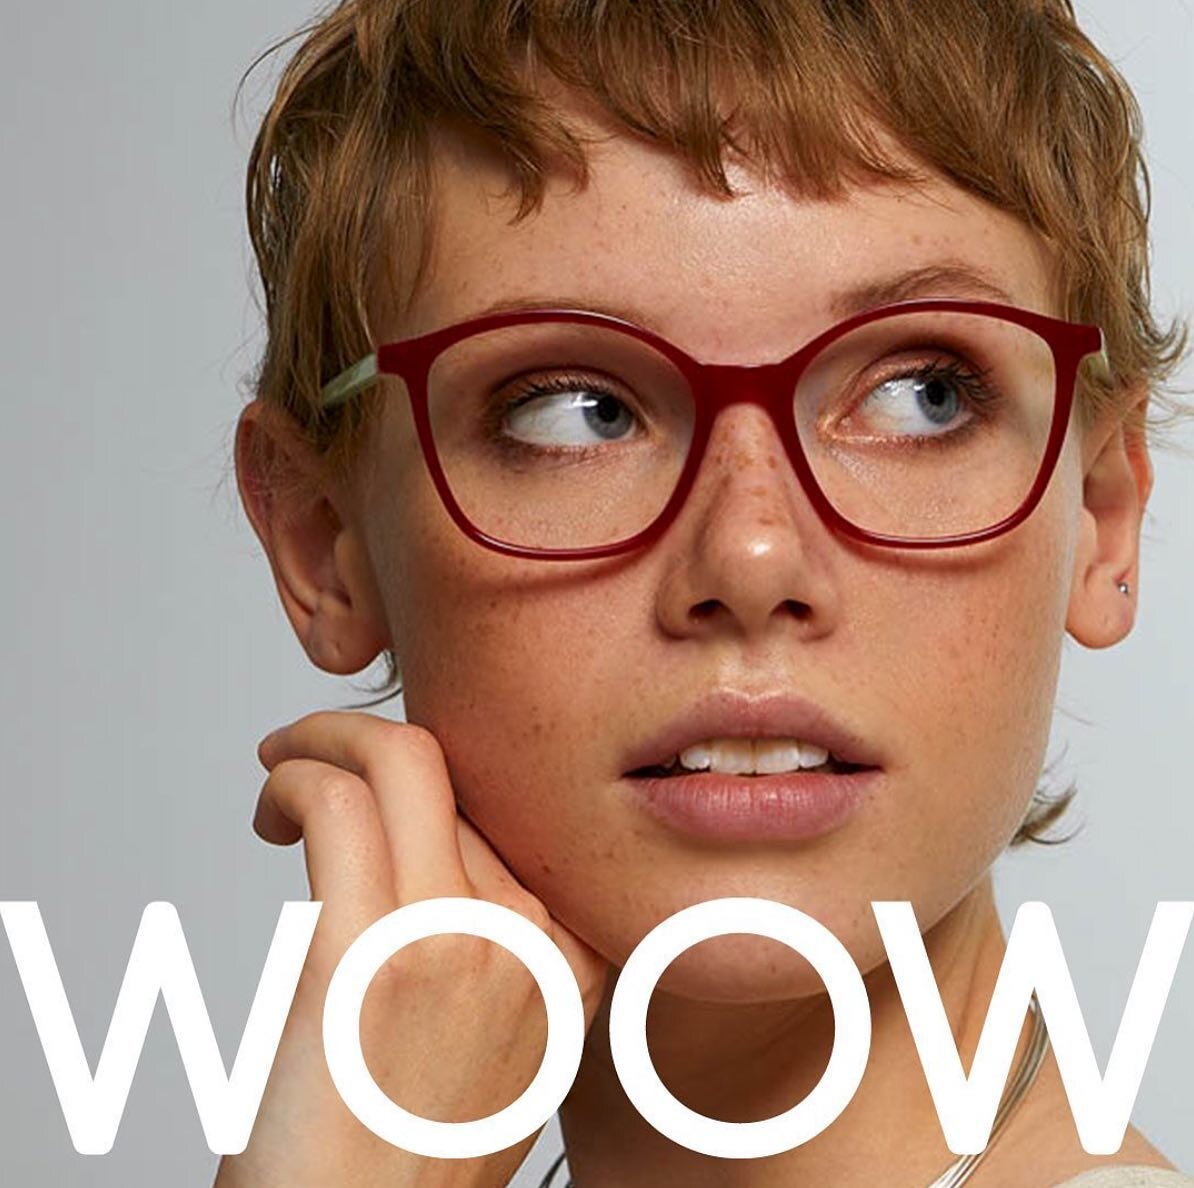 This could be you! Find a range of WOOW frames @wooweyewear at our Lothian Road practice. Remember to email to book your appointment first 🏴󠁧󠁢󠁳󠁣󠁴󠁿🌟

#frames #optometry #blackandlizars #woow #wooweyewear #designer #designerglasses #optometry #